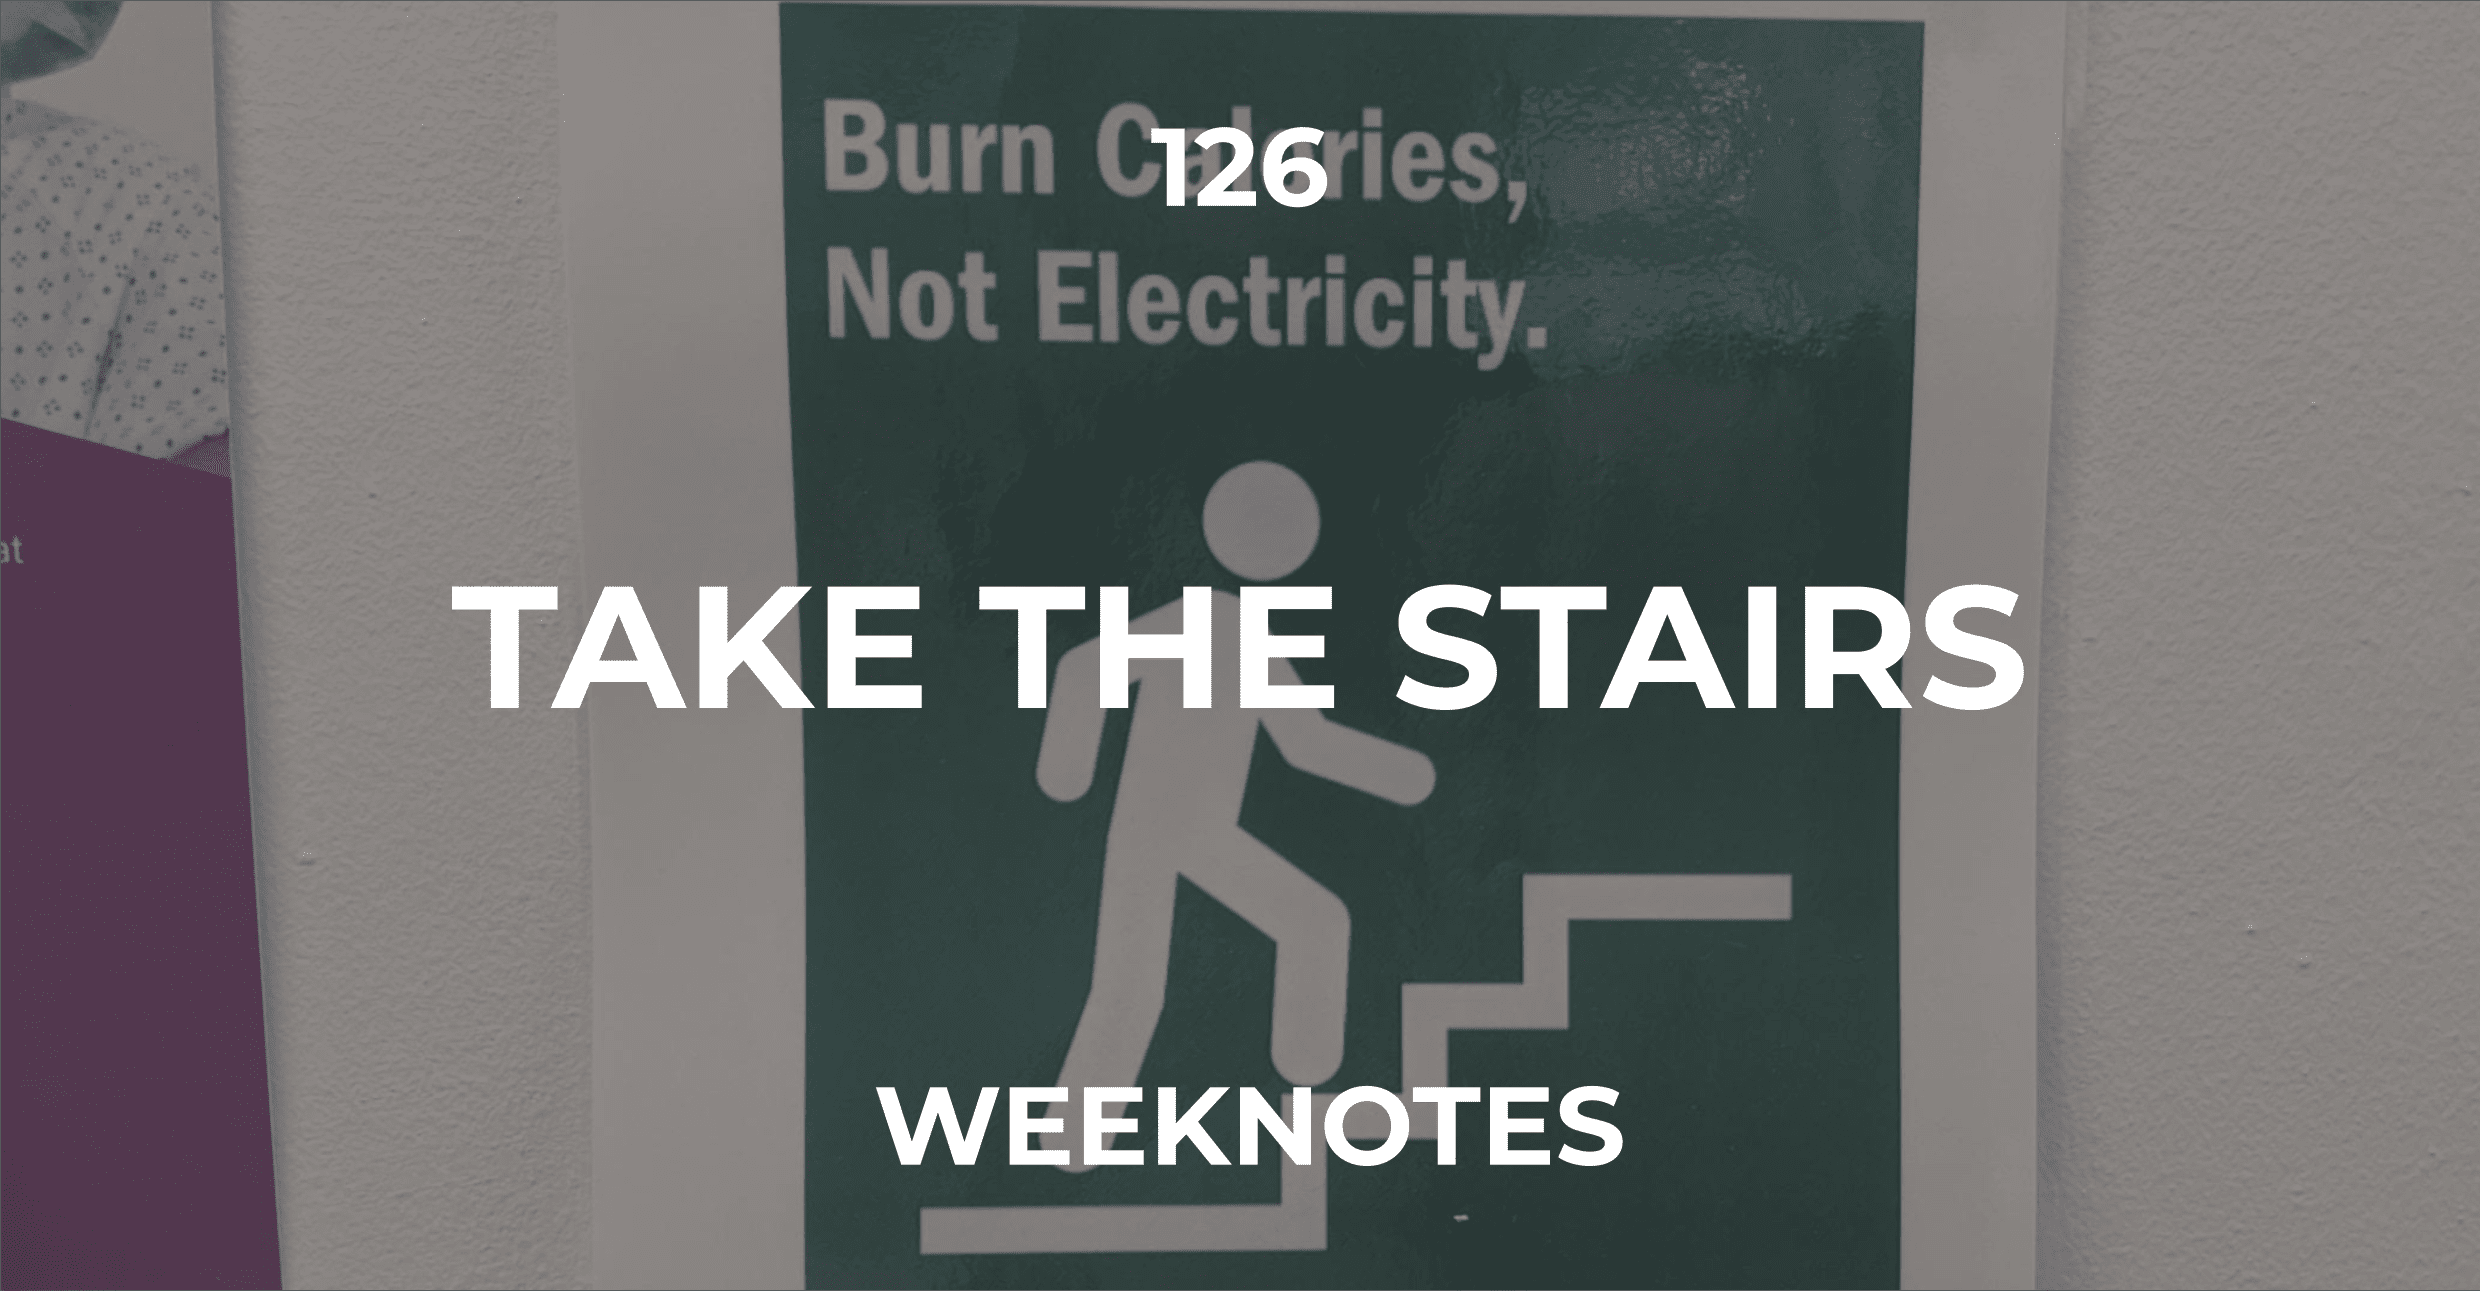 Take the stairs